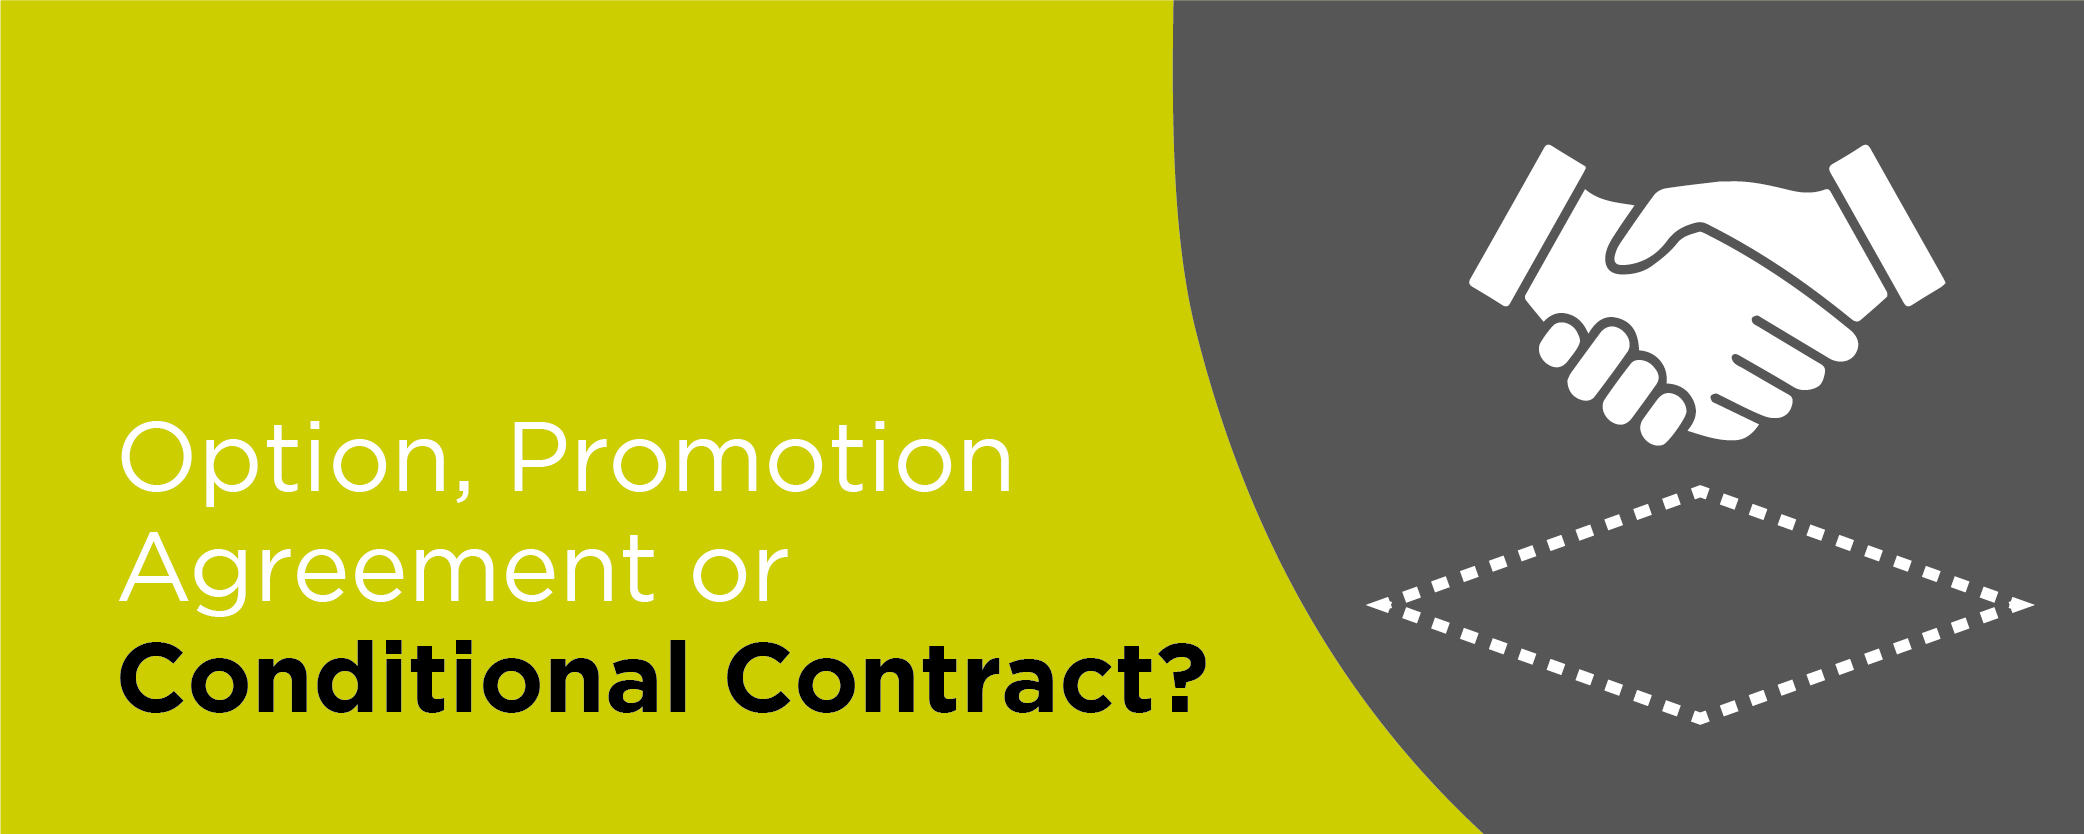 Option, Promotion Agreement or Conditional Contract?